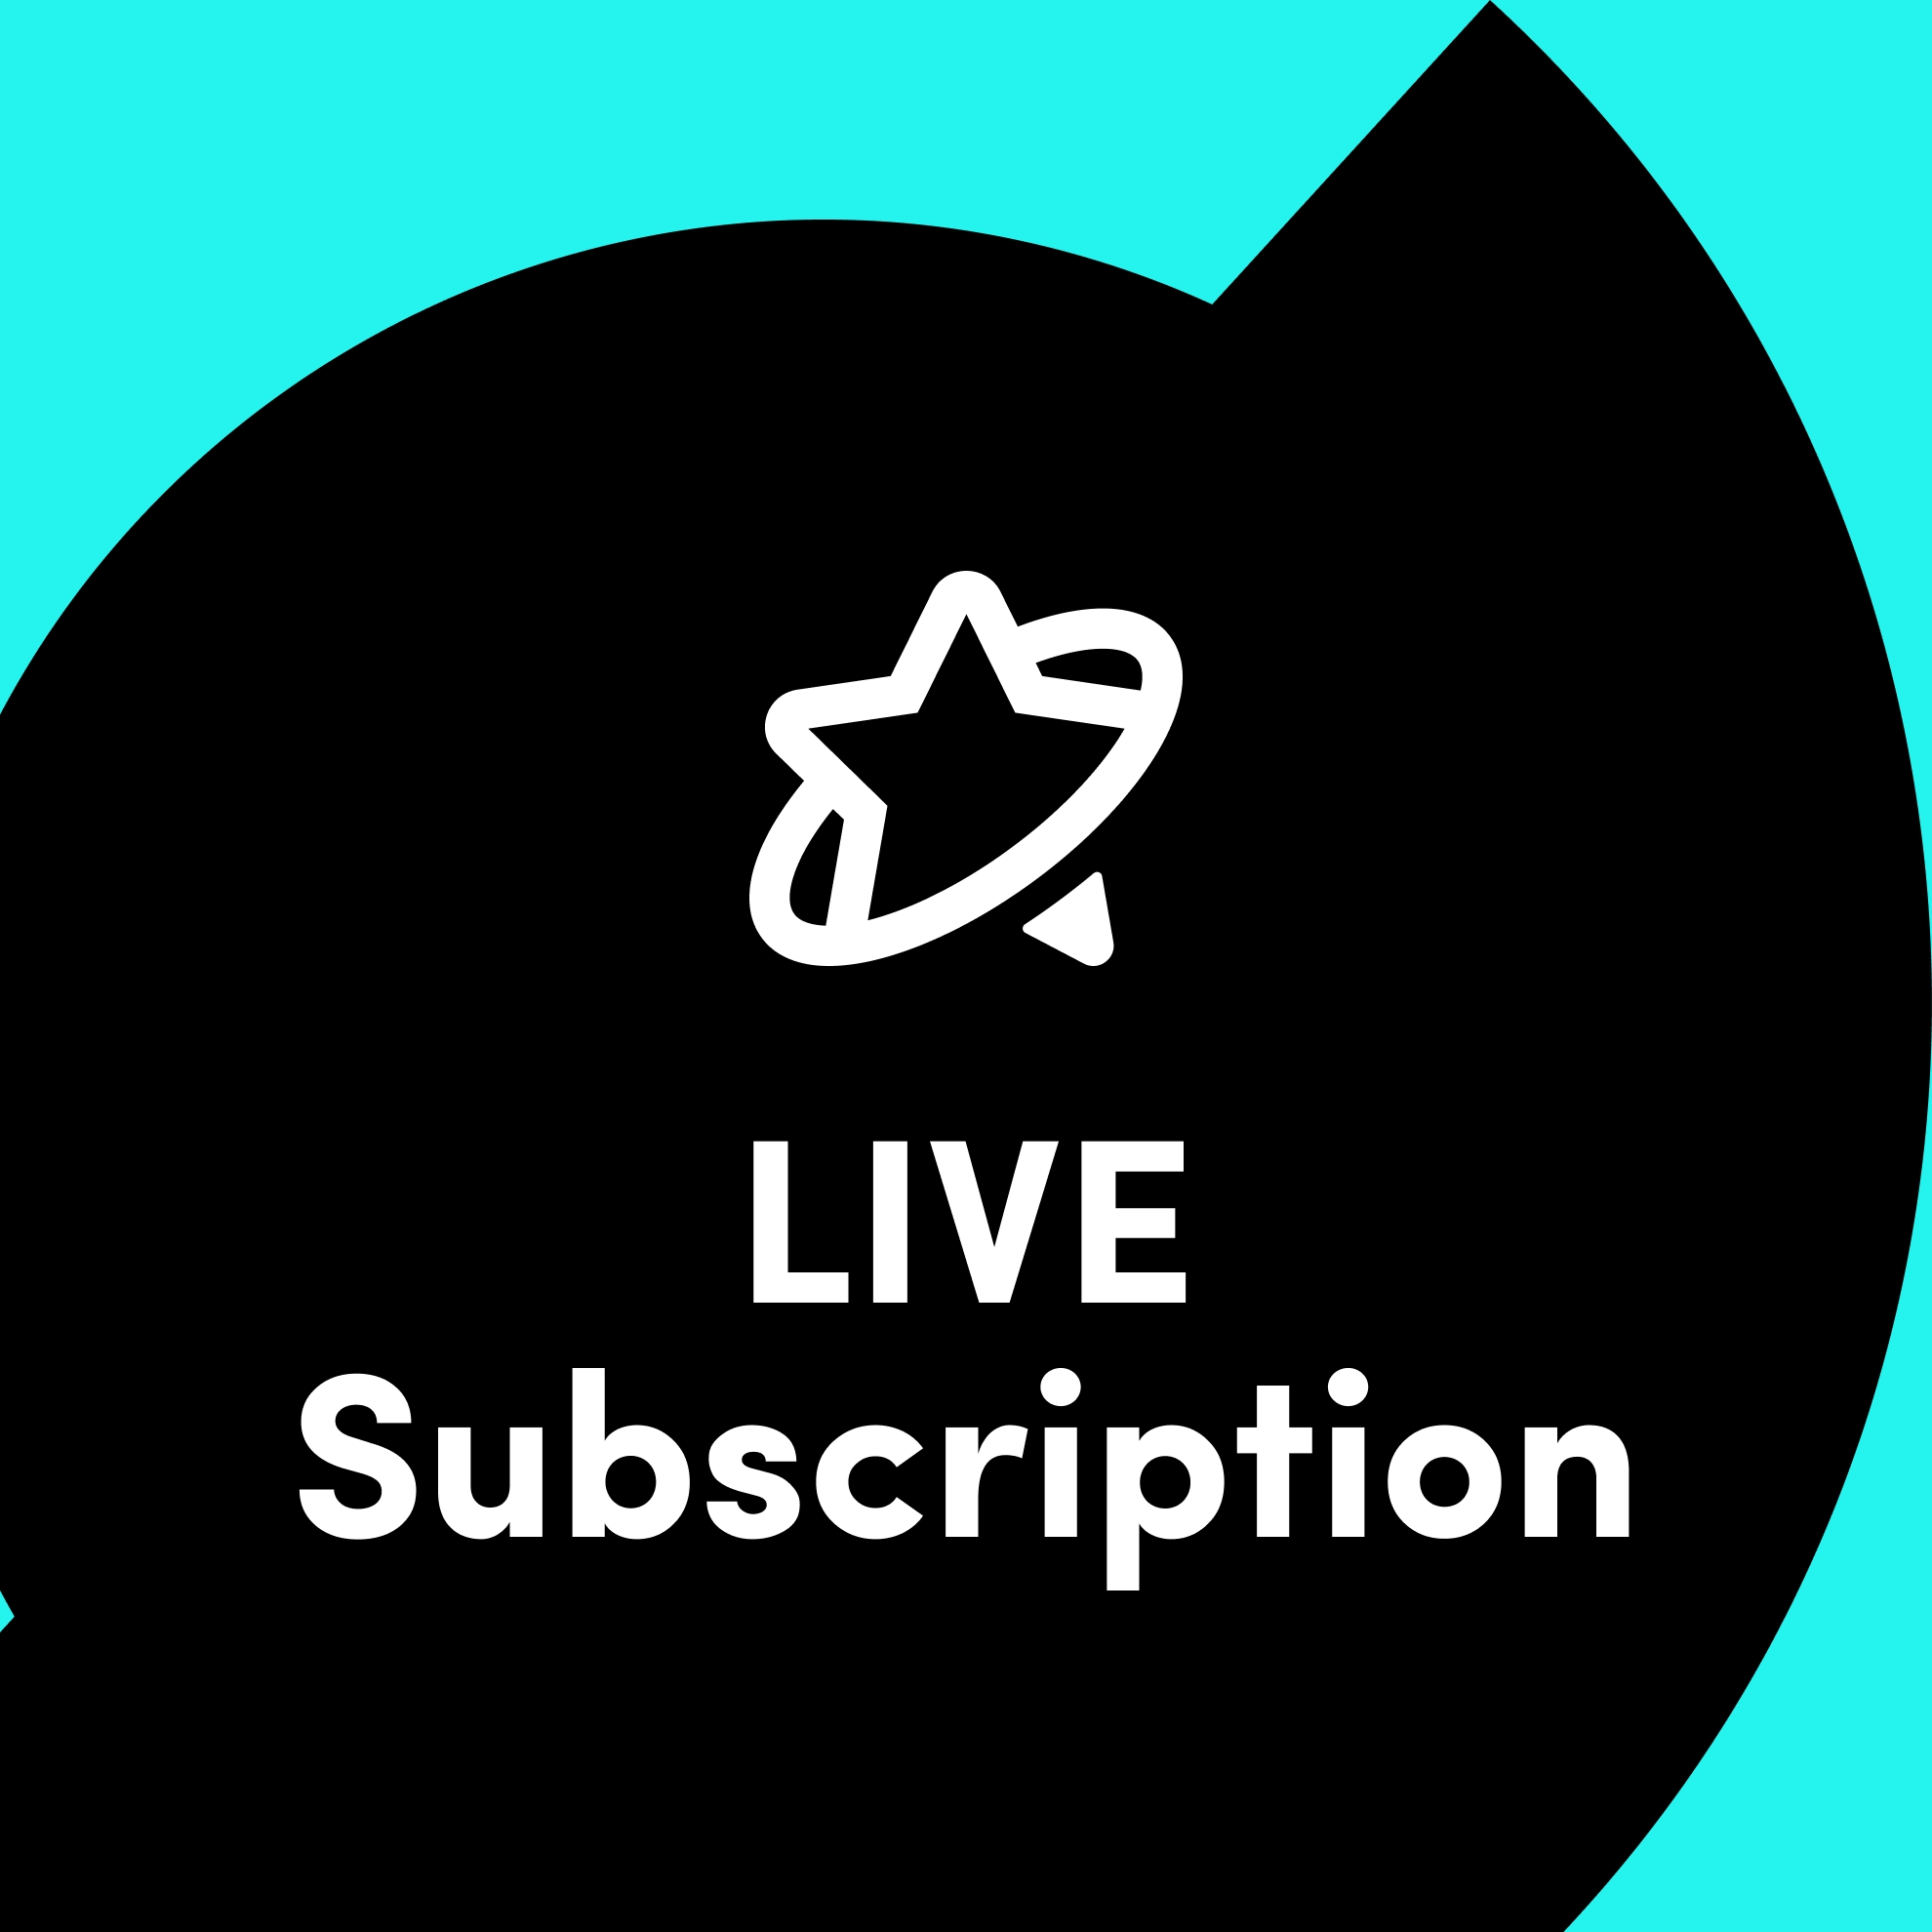 Offering More LIVE Subscription Perks with Subscriber-Only Videos ...